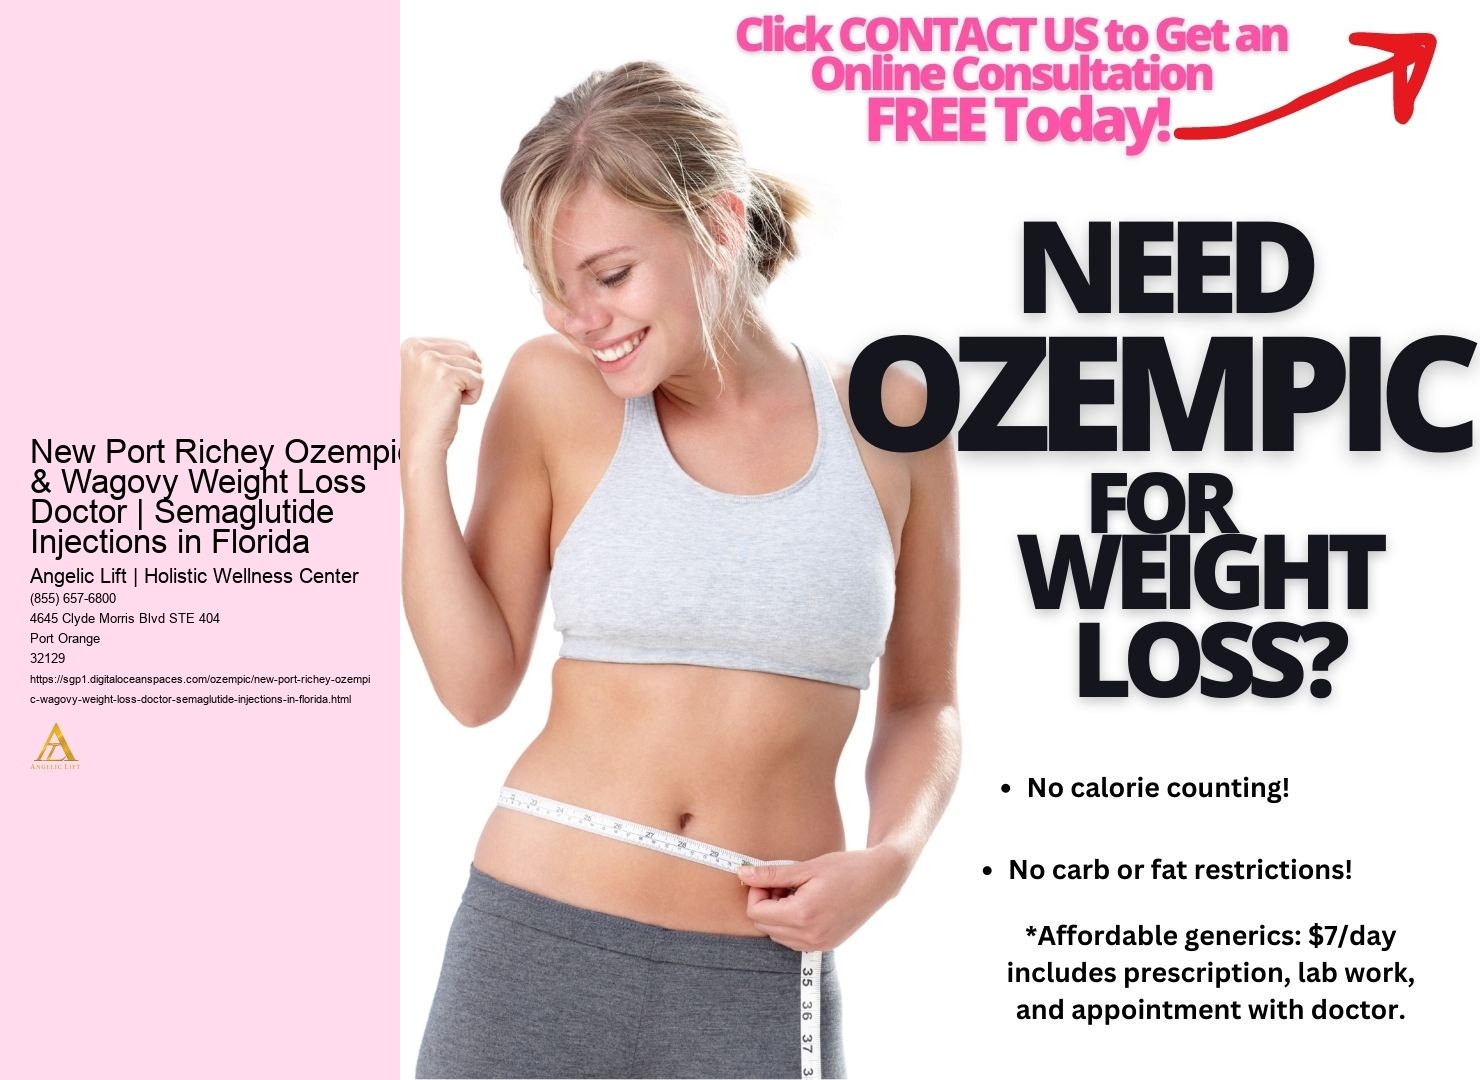 New Port Richey Ozempic & Wagovy Weight Loss Doctor | Semaglutide Injections in Florida